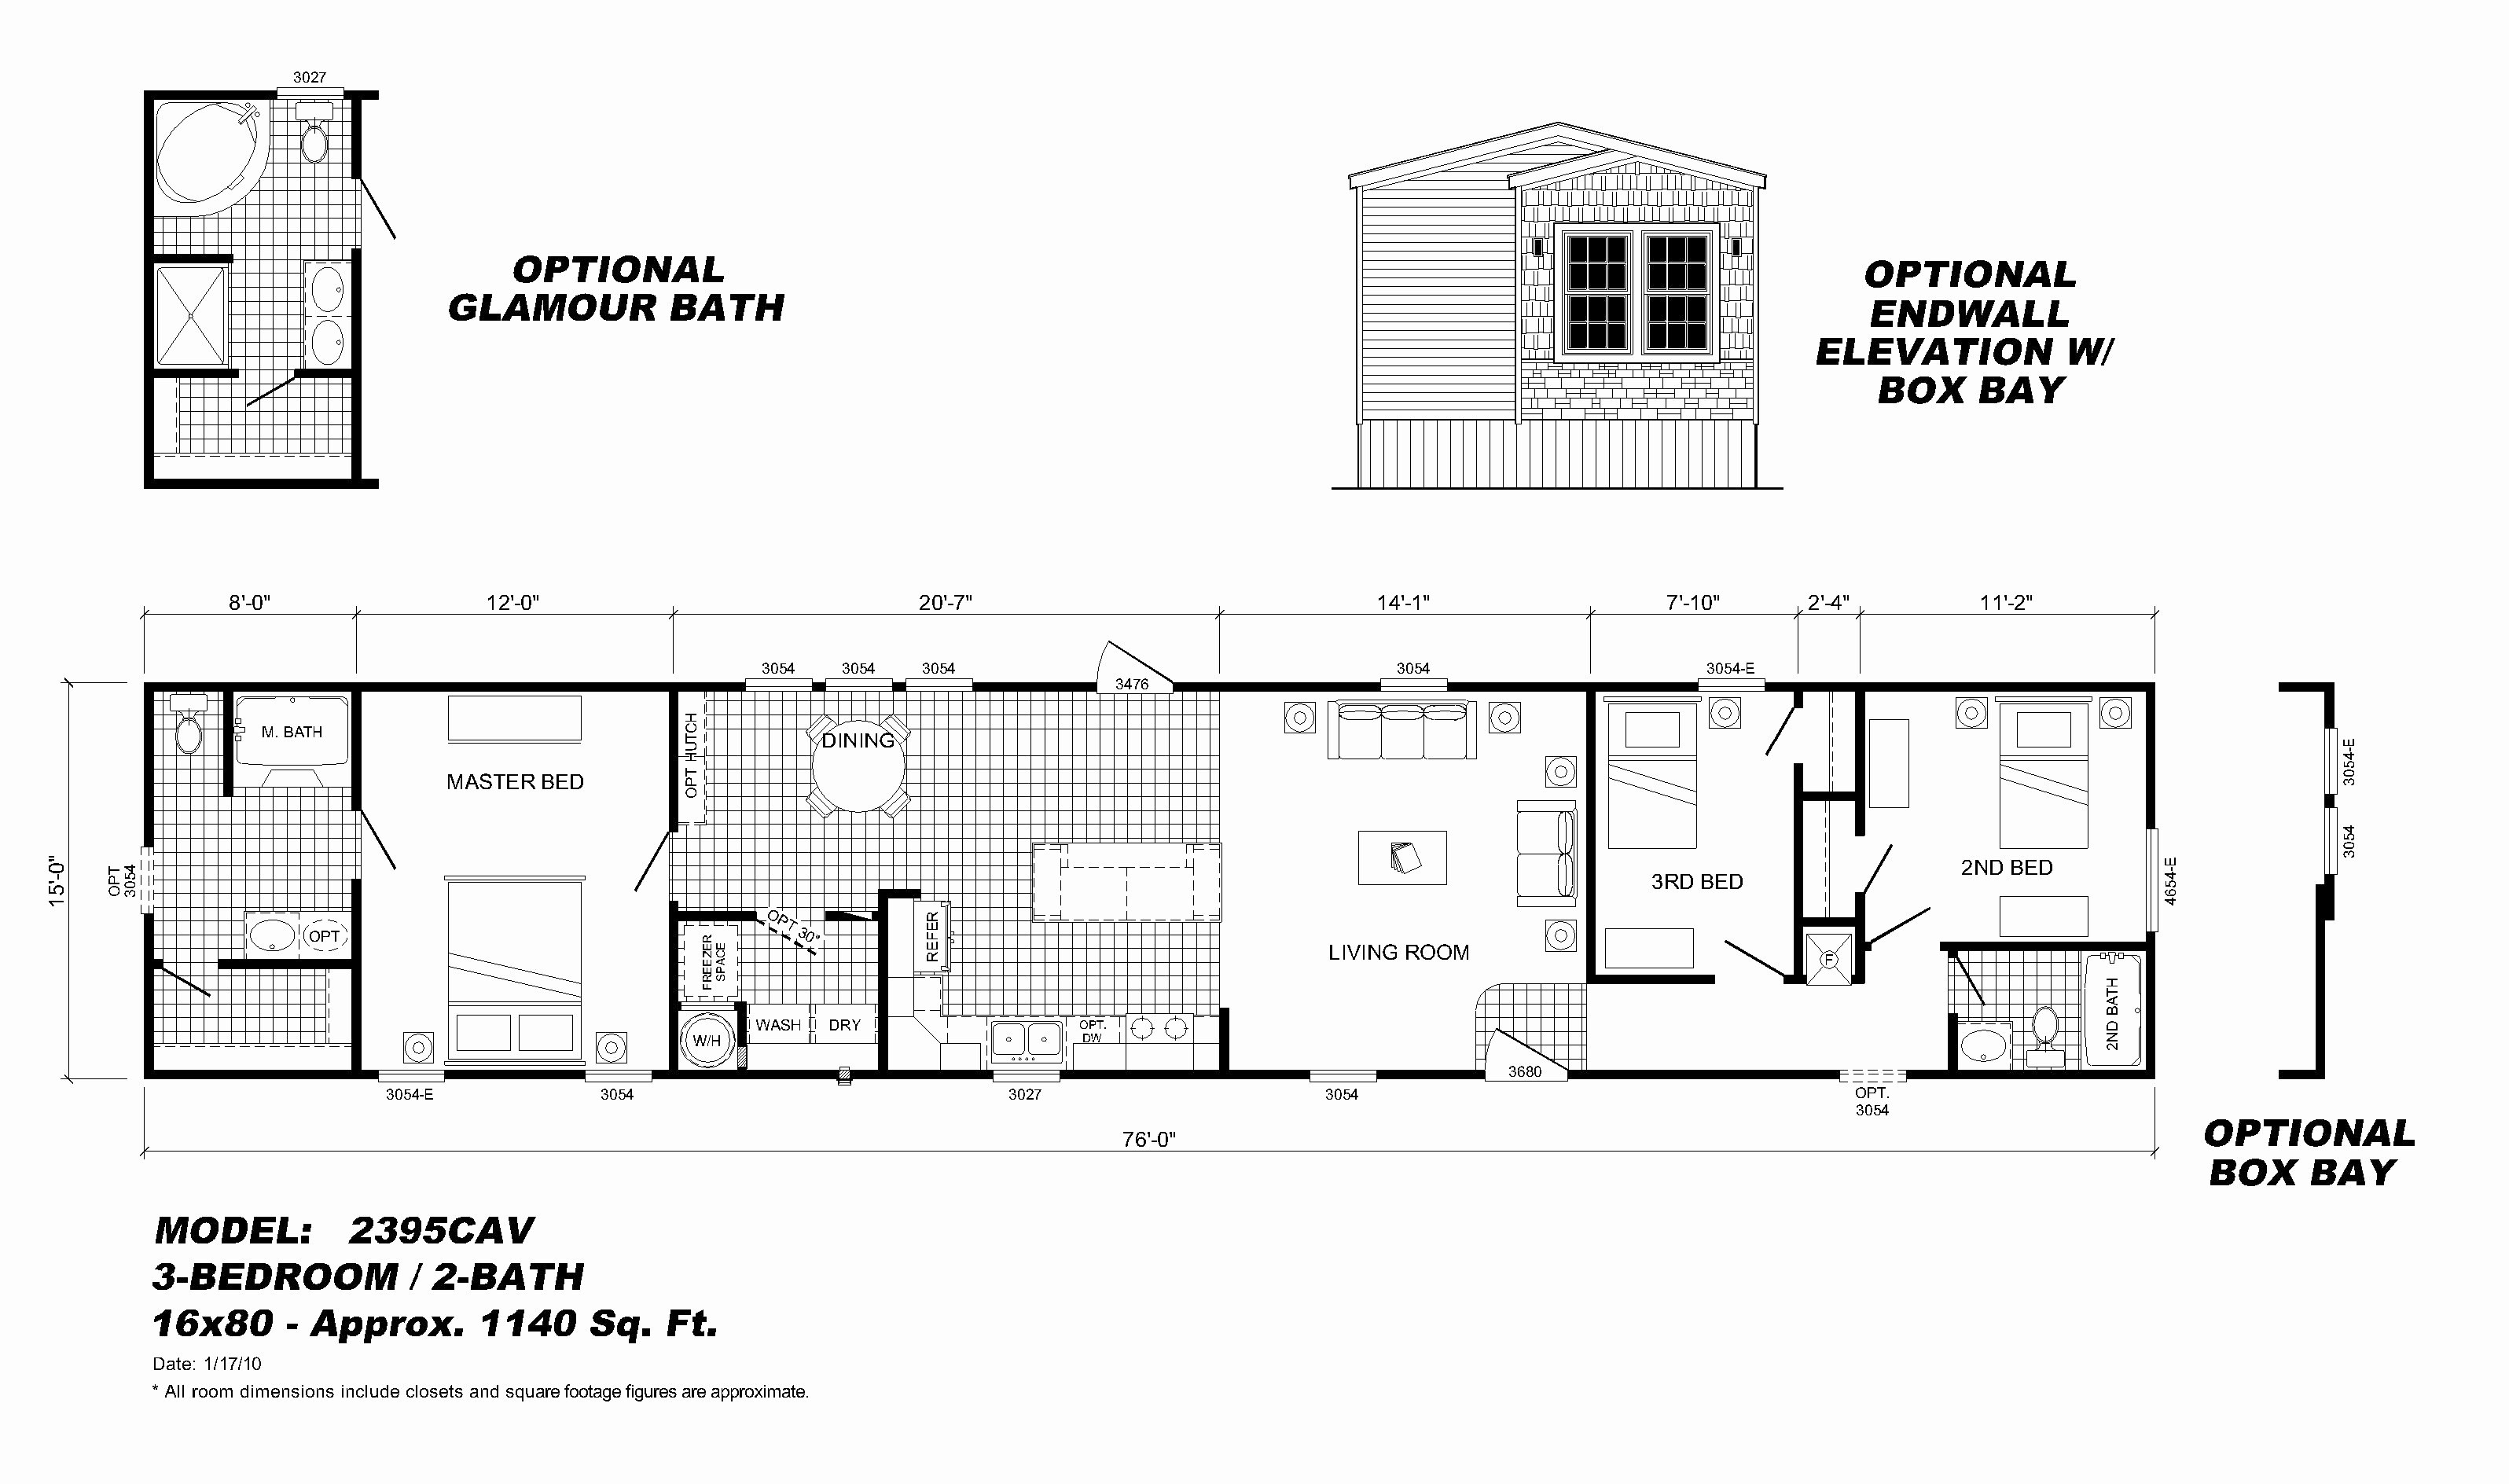 Fleetwood Double Wide Mobile Home Wiring Diagrams | Wiring Diagram - Manufactured Home Wiring Diagram